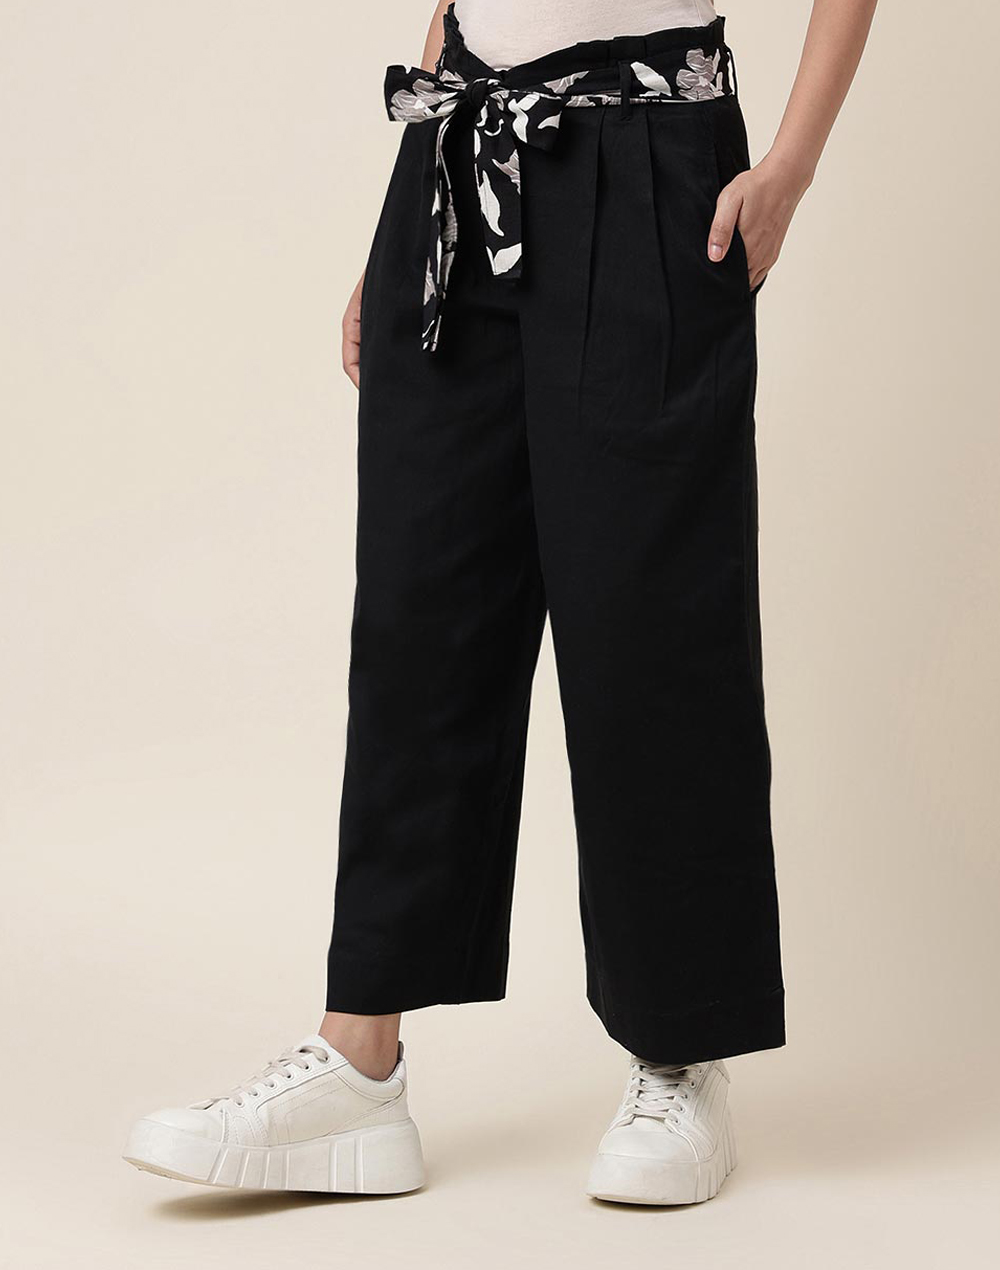 White Cotton Ankle Length Tapered Casual Pant